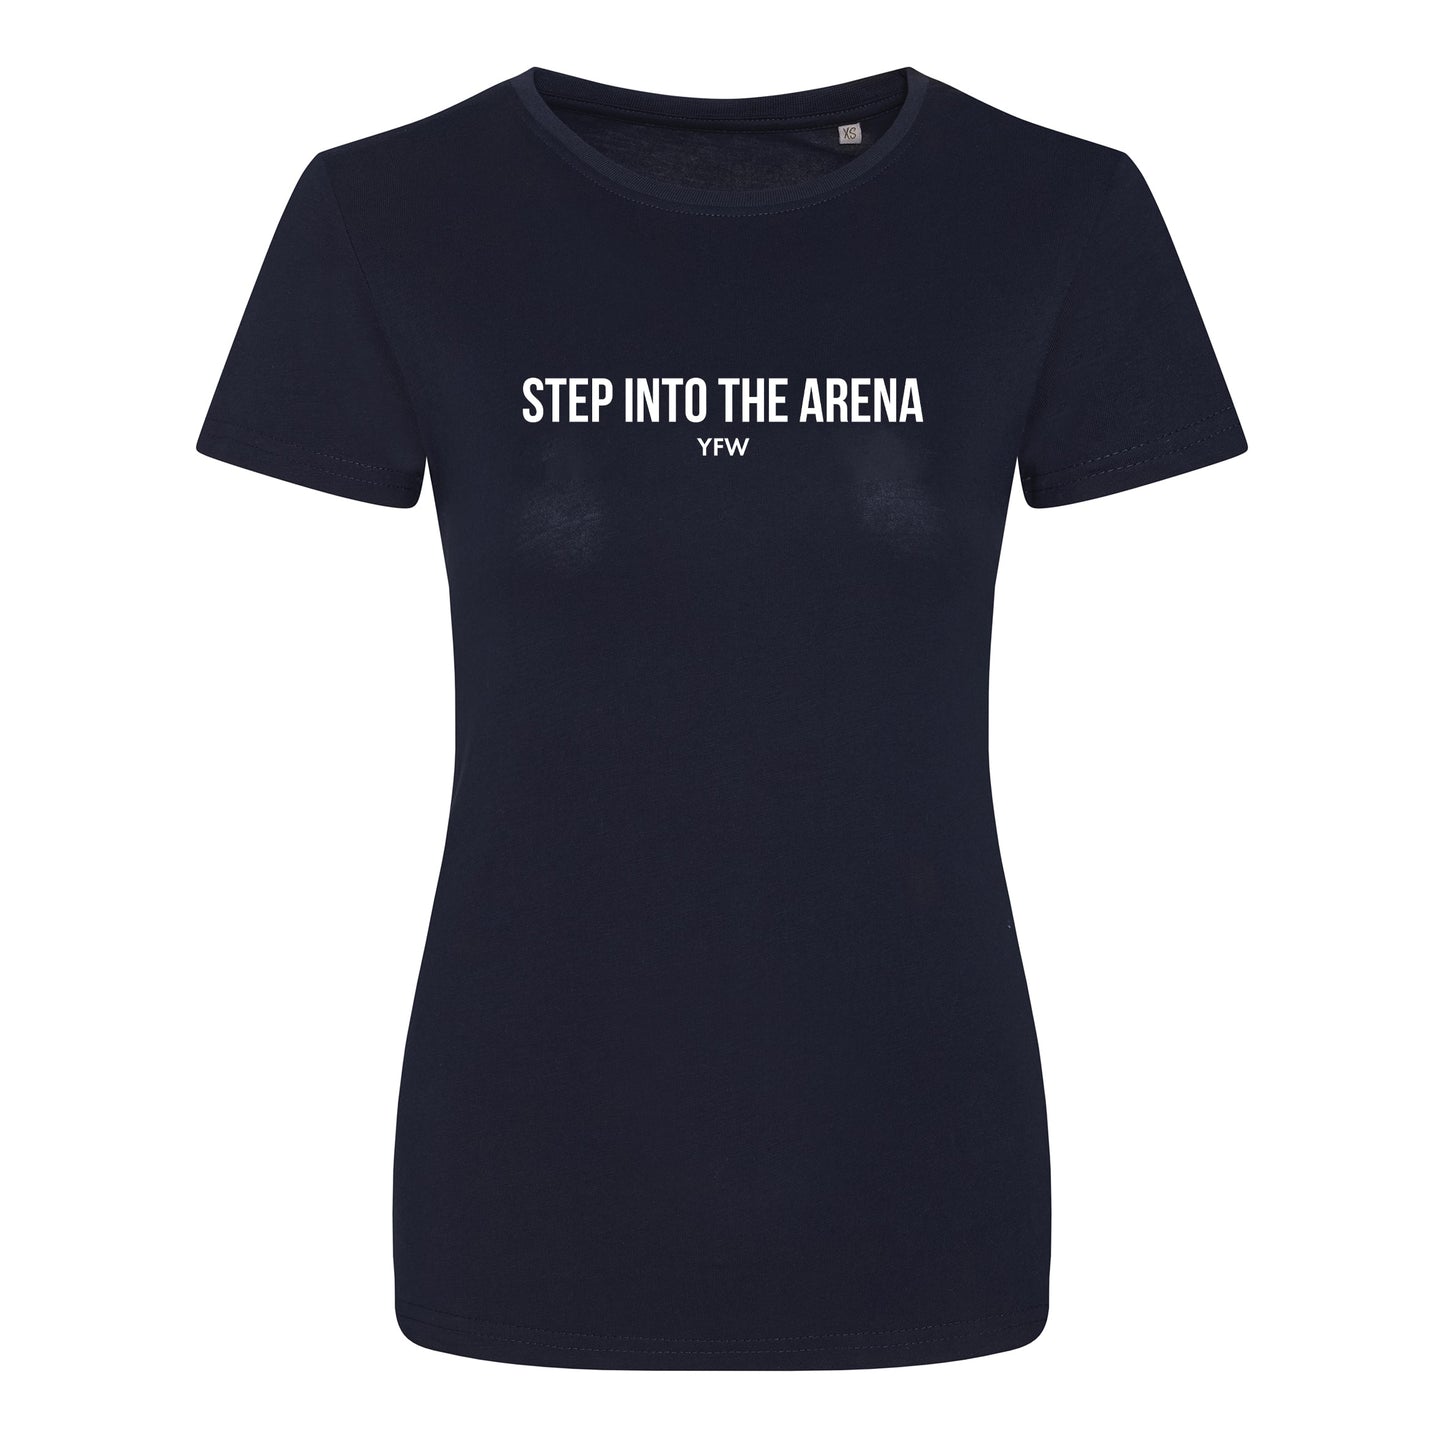 'Step into the arena' Cinch Navy Tee